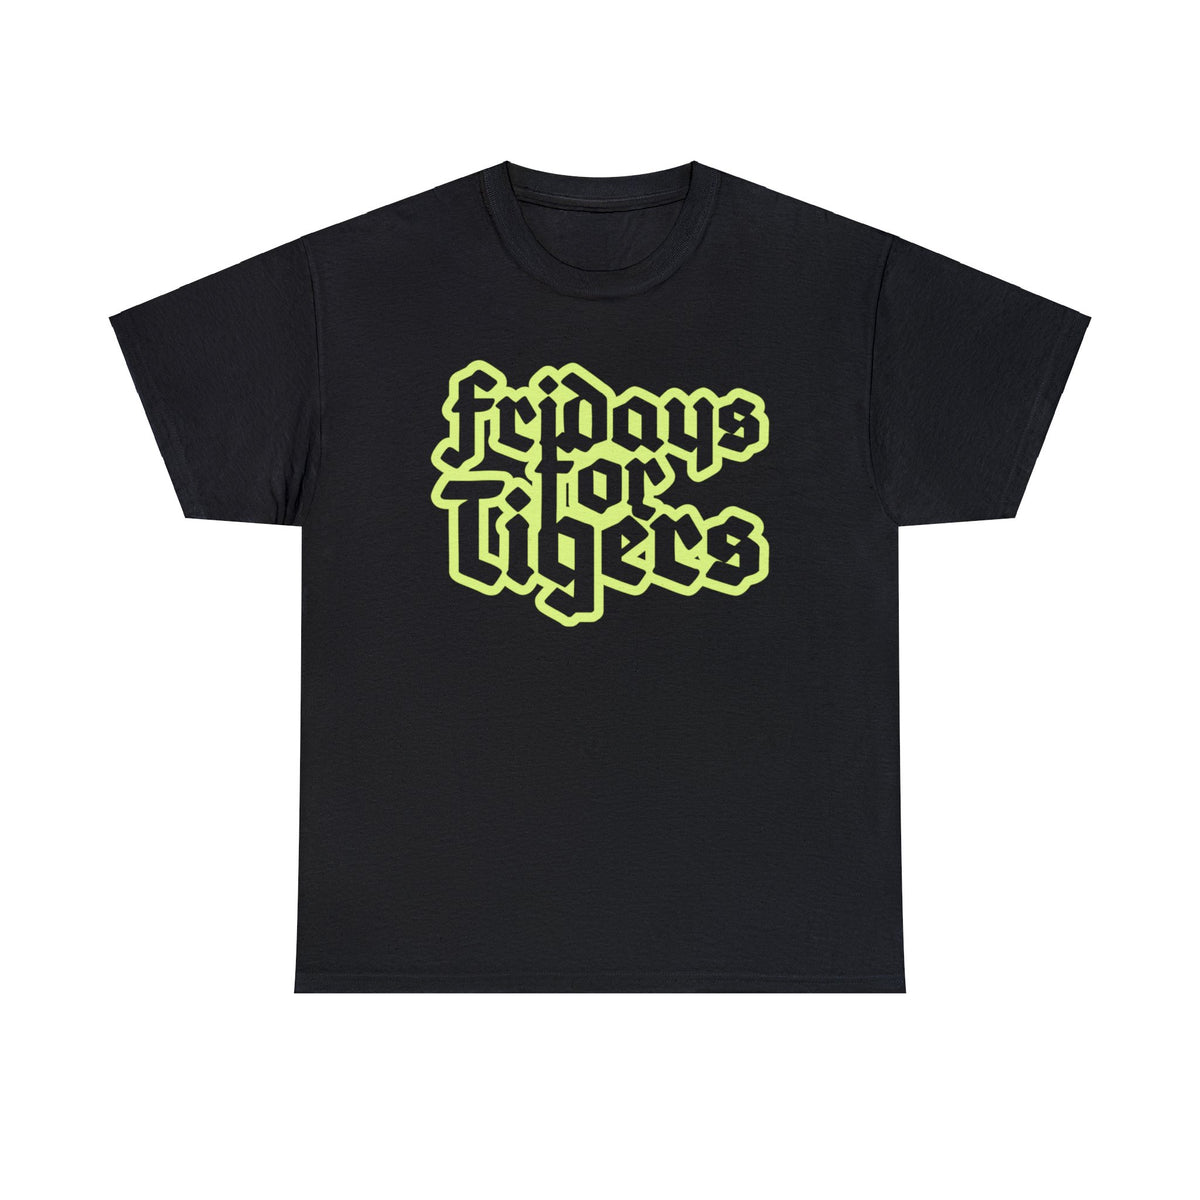 Fridays for Tigers - SZ - T-Shirt